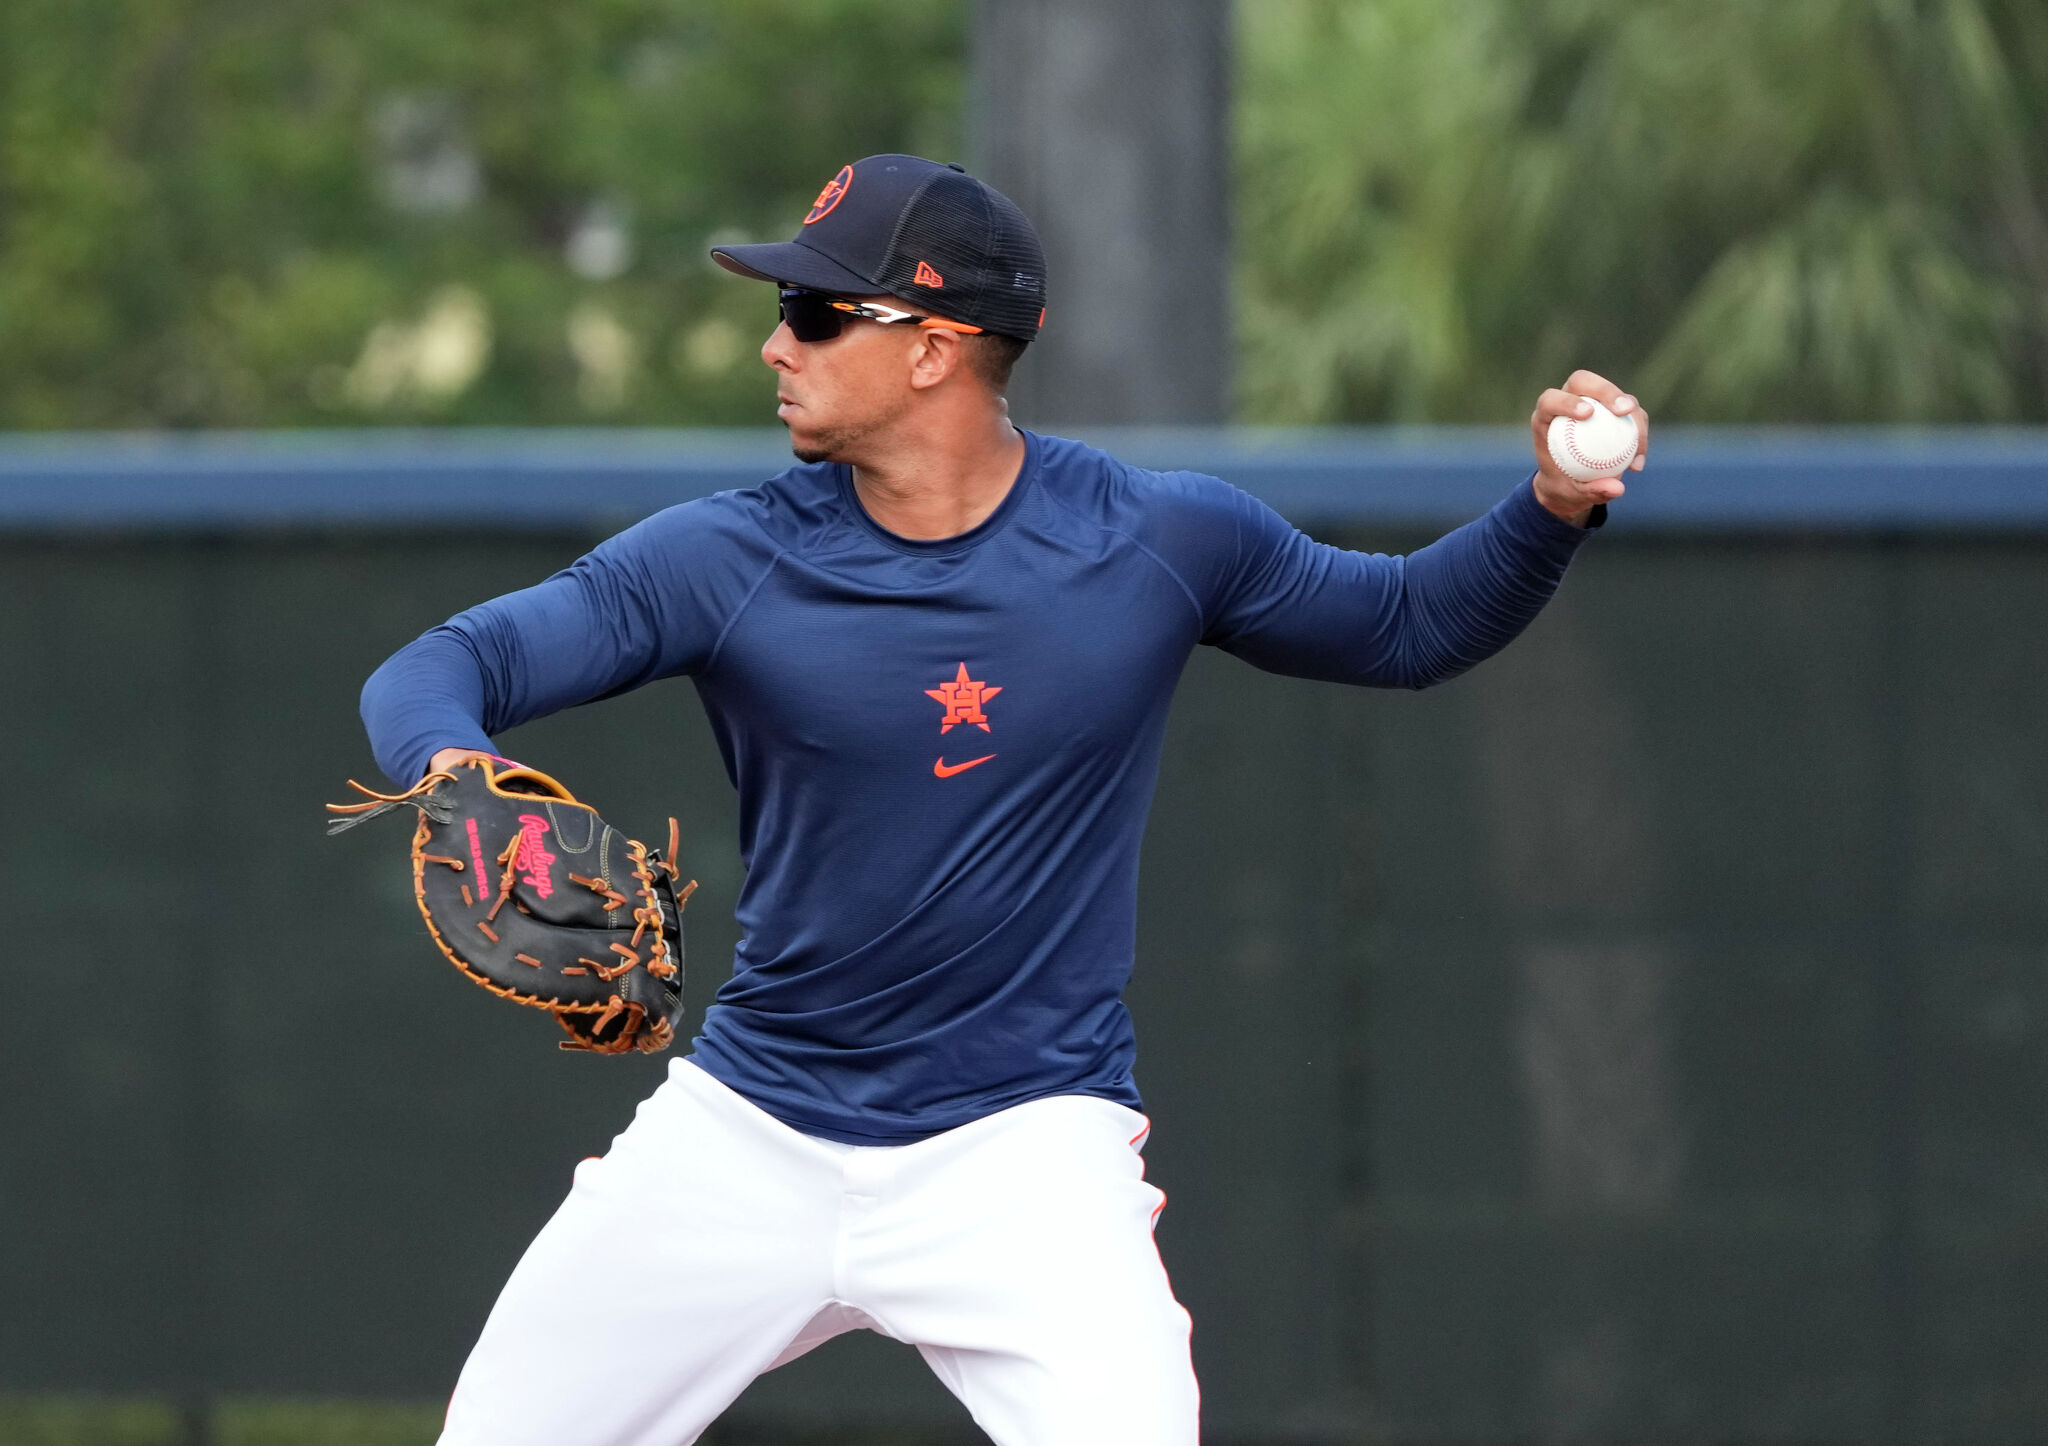 Astros' Michael Brantley off to solid start in rehab assignment